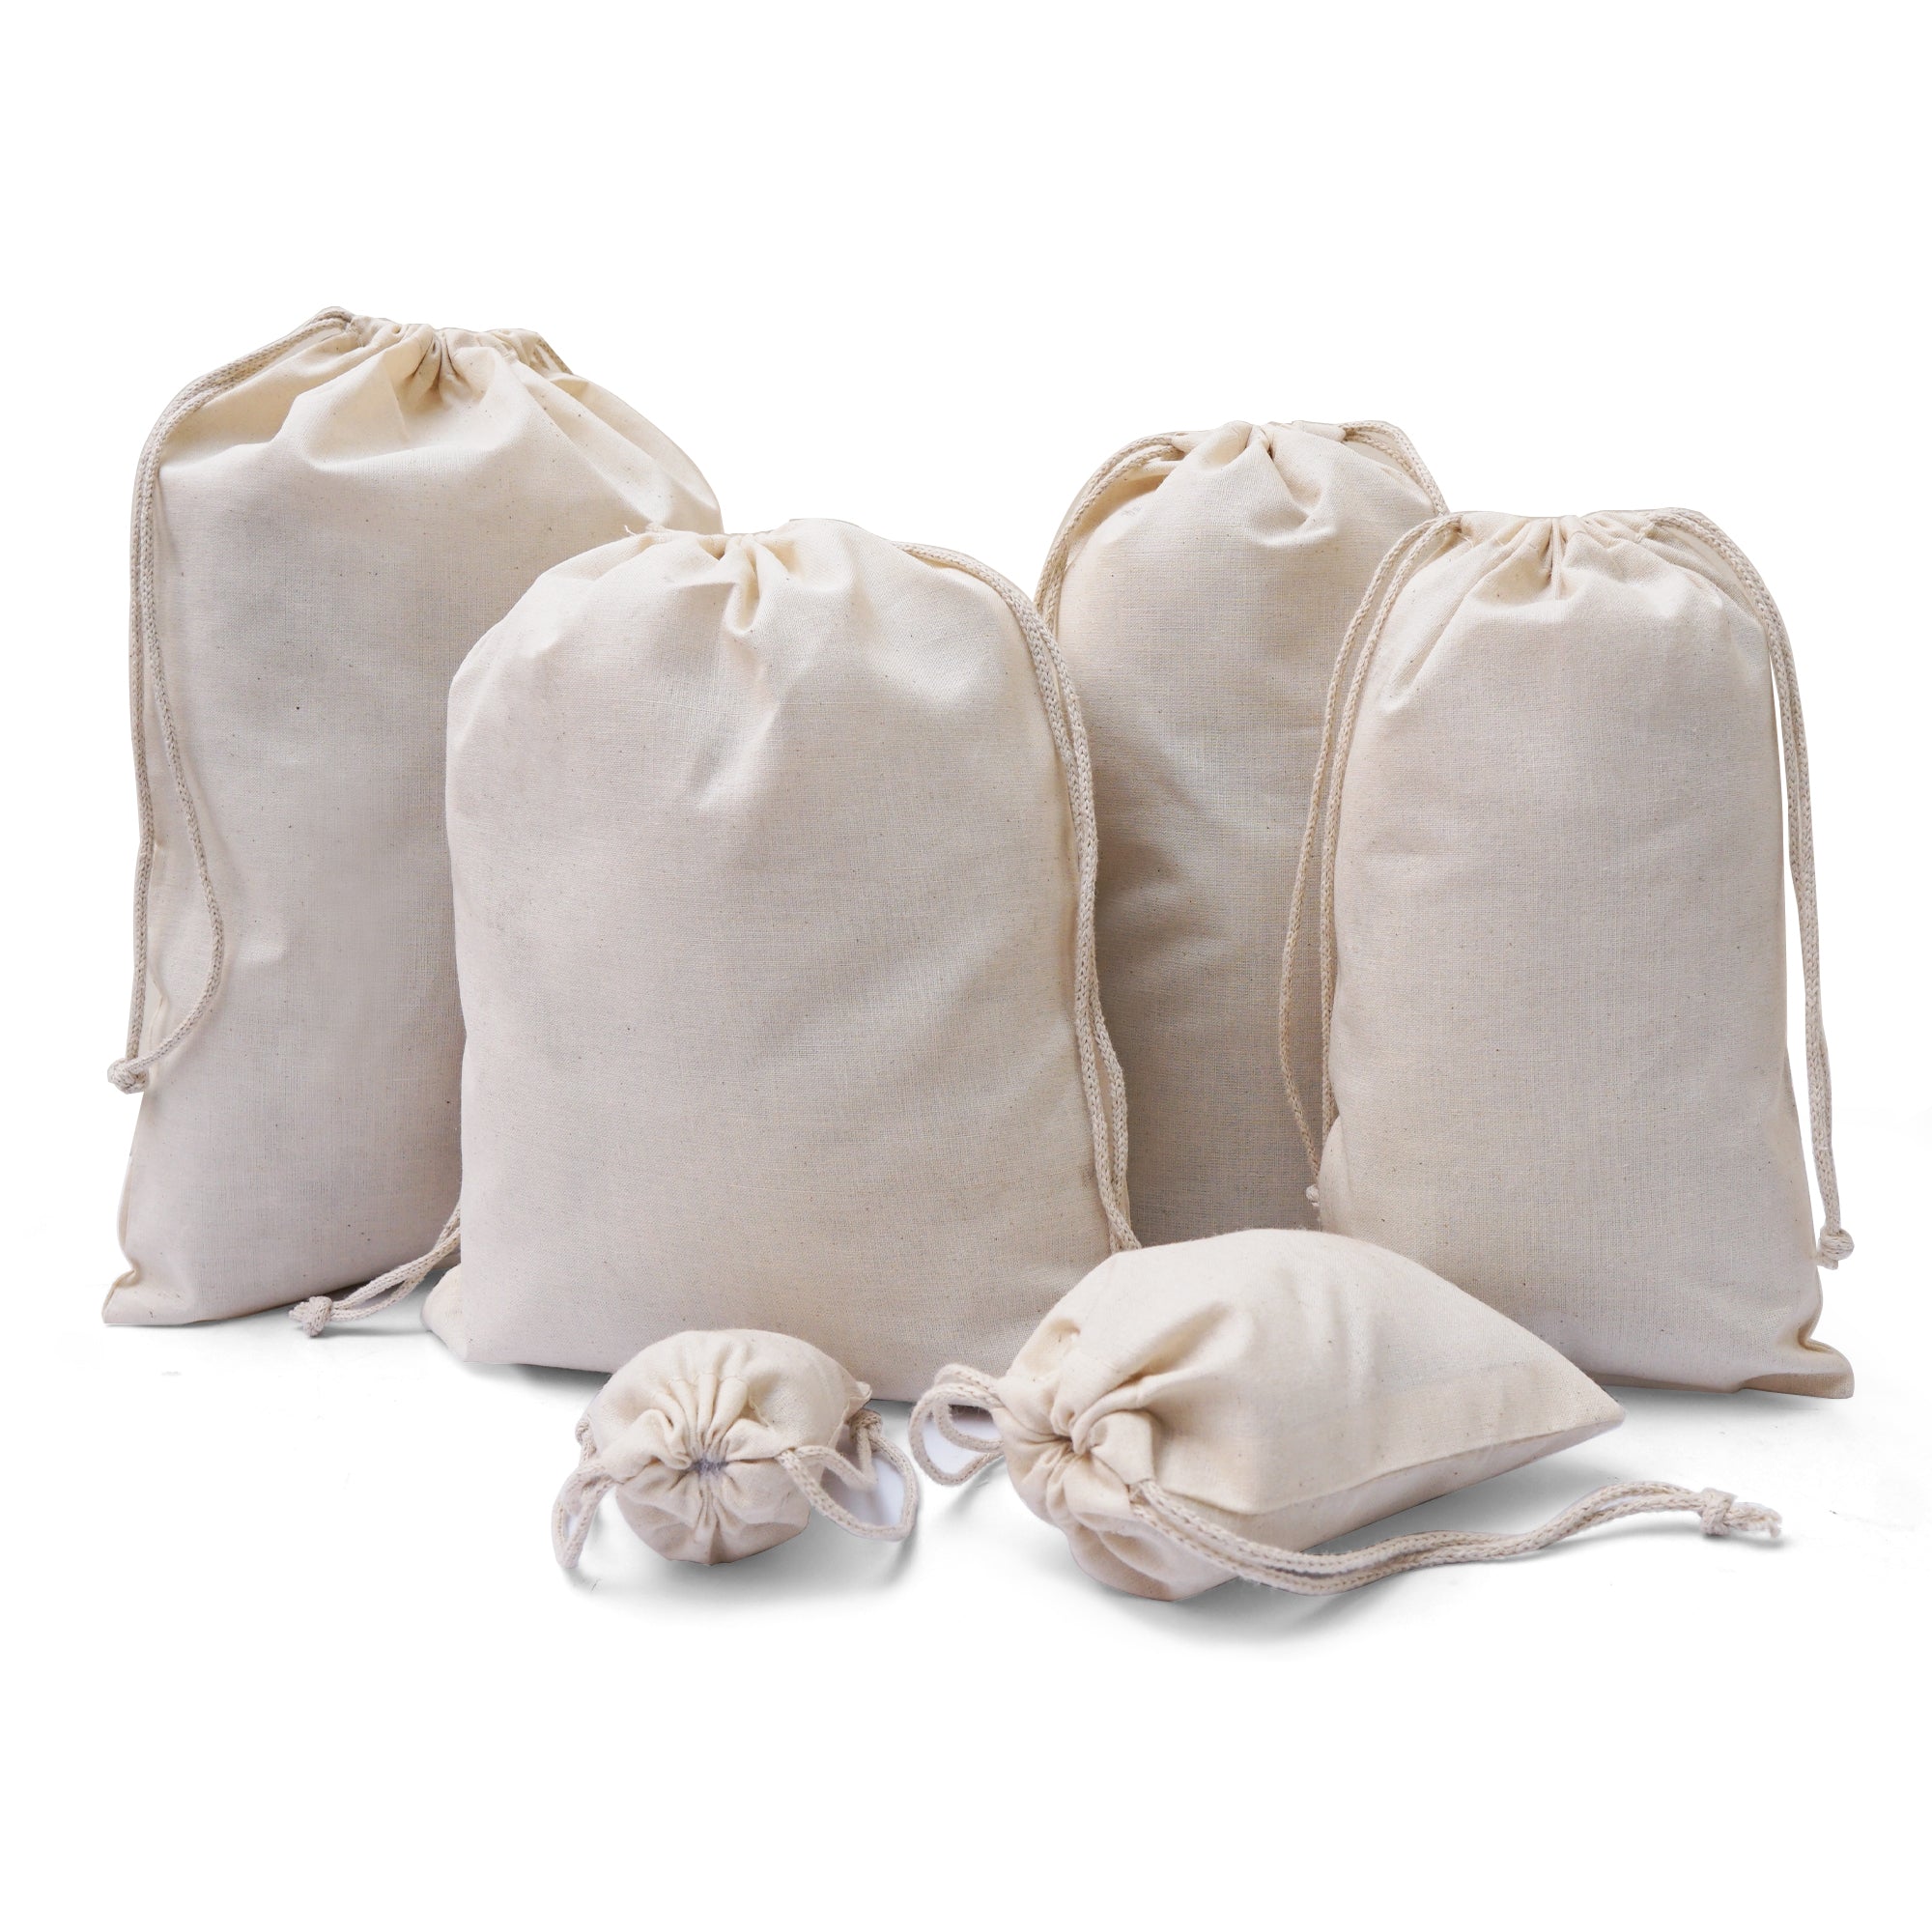  DRQ Cotton Drawstring Bags, EcoFriendly Muslin Bags (5 by 7  inch) Gift Bags, Party Favor Bags, Unbleached Cotton Pouches, Sachet  Bag,Fabric Bags,Cloth Bags(50 Pieces) : Health & Household